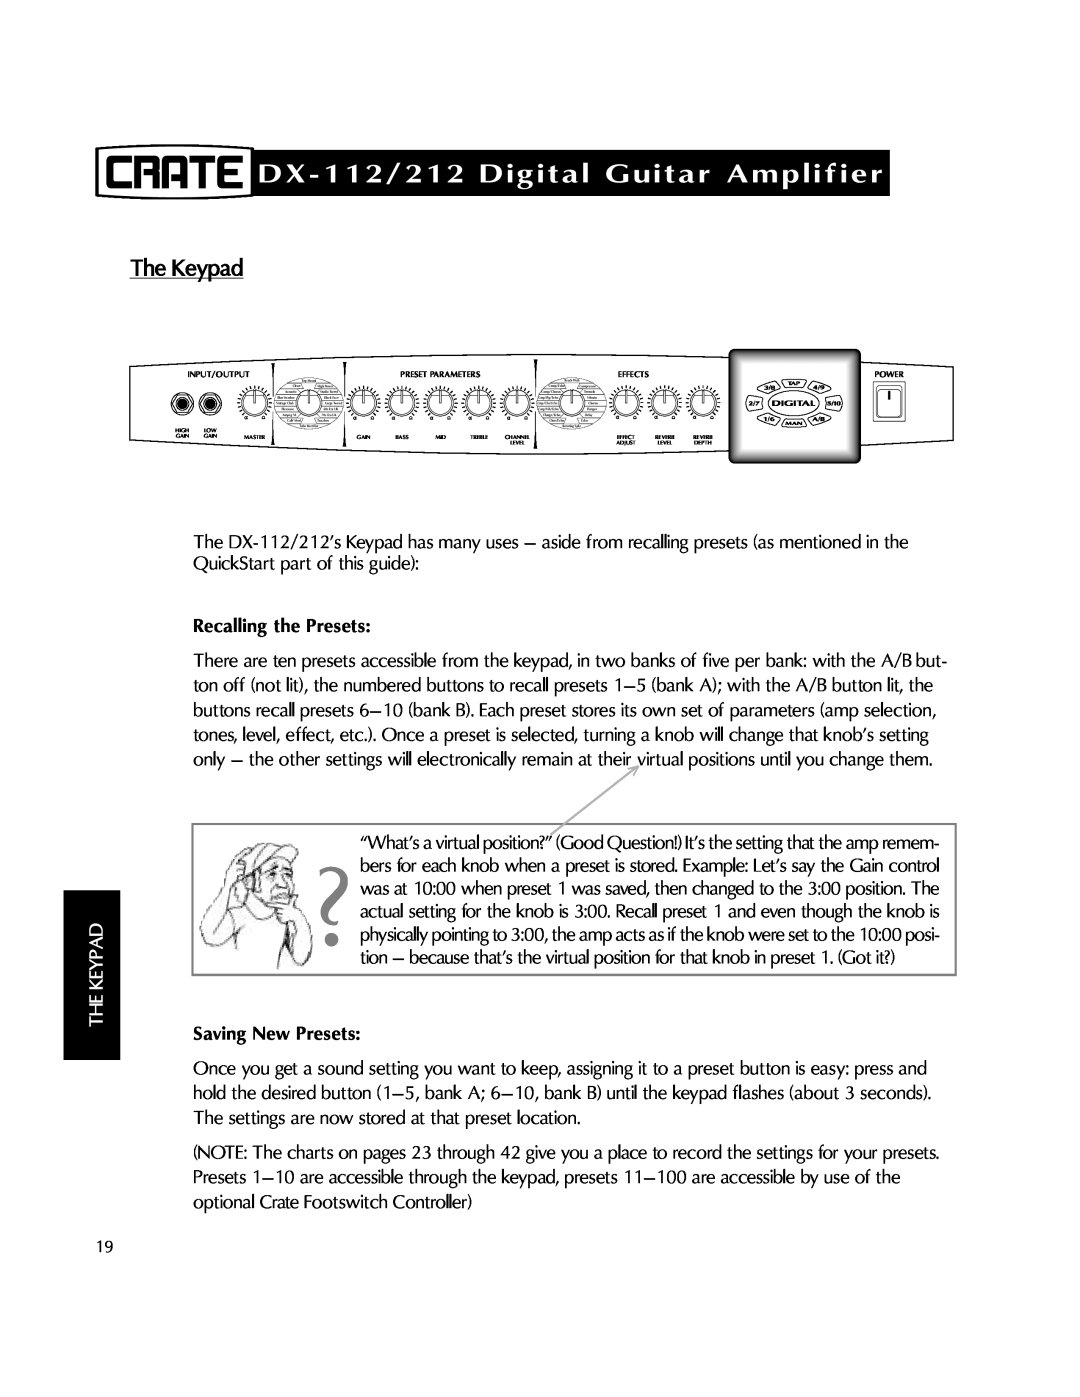 Crate Amplifiers DX-212 manual The Keypad, Recalling the Presets, Saving New Presets, DX-112/212Digital Guitar Amplifier 